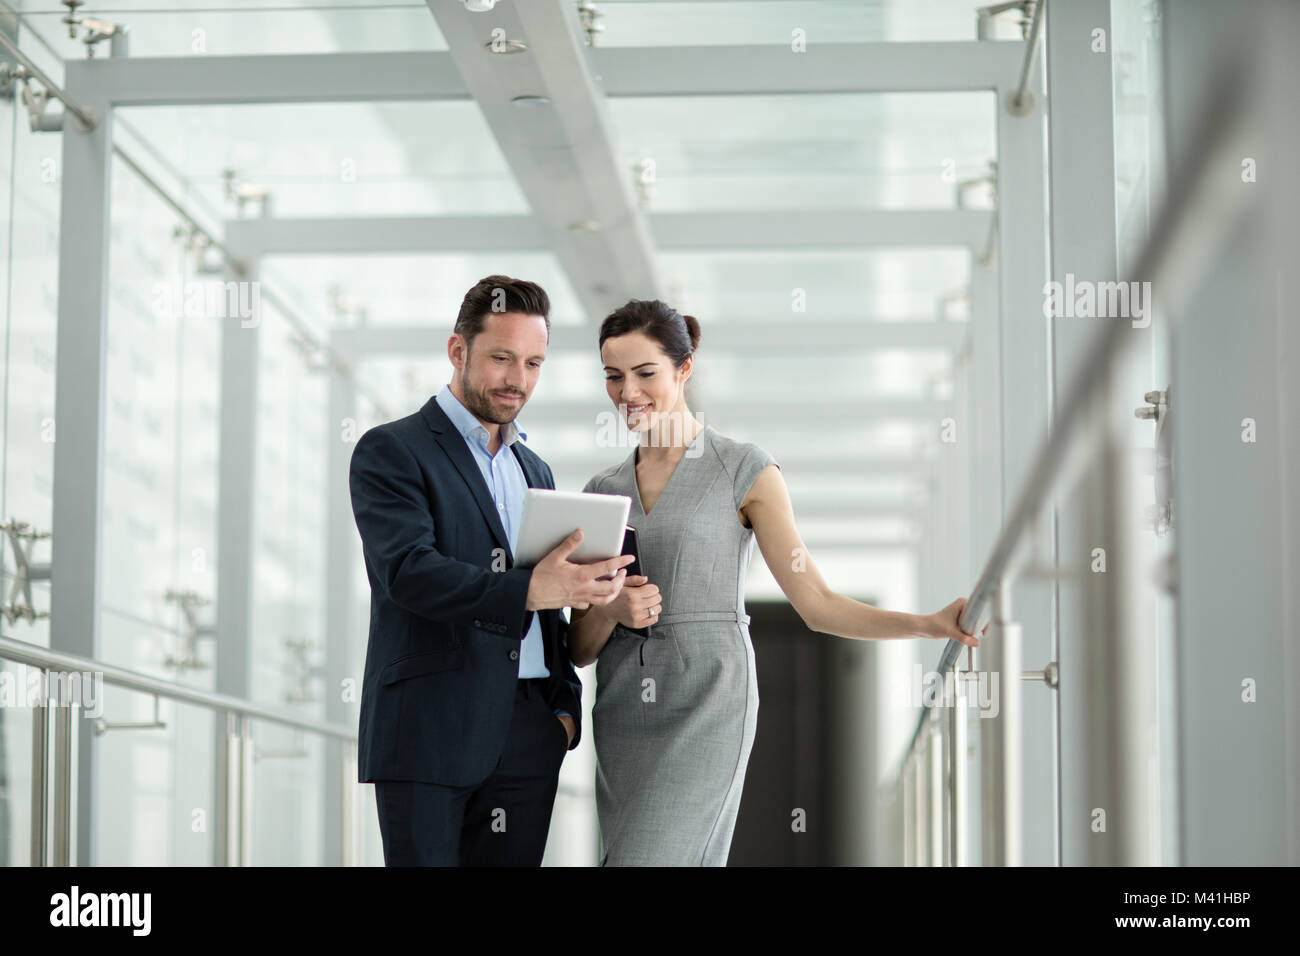 Business colleagues looking at digital tablet together Stock Photo